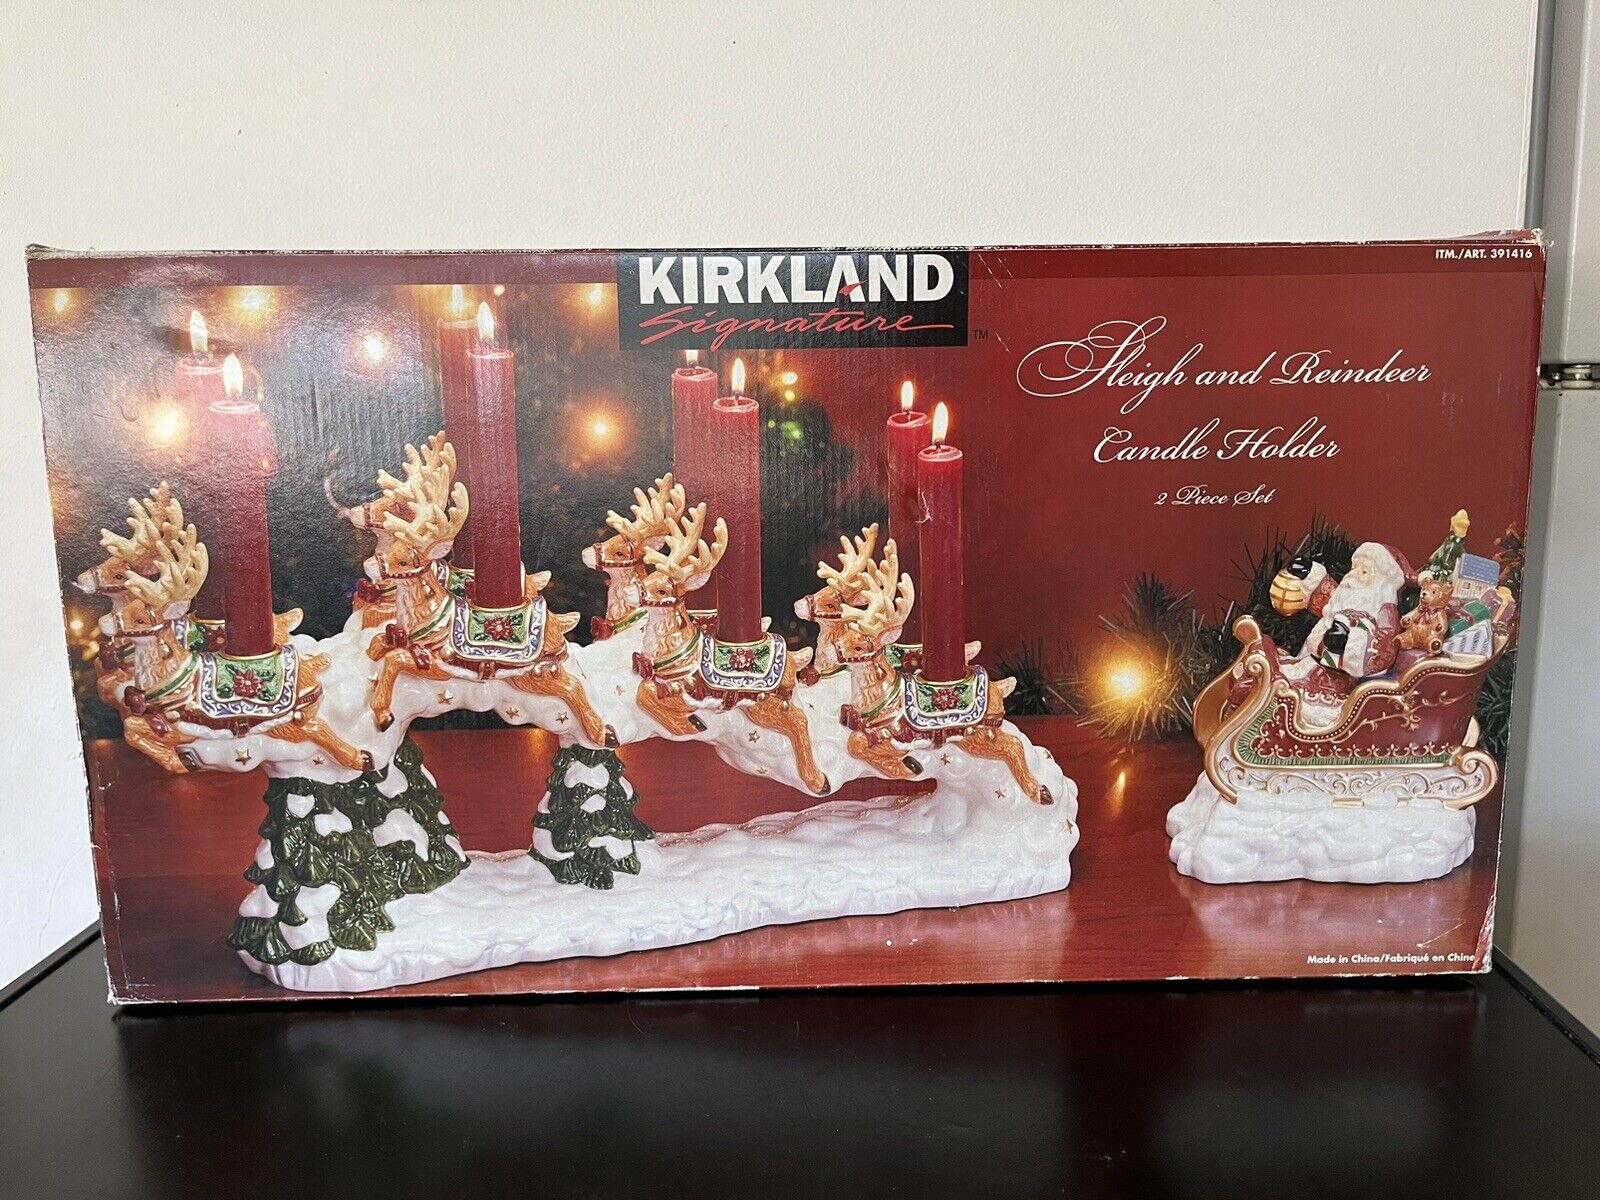 NEW Kirkland Signature Santa and Sleigh with Reindeer Candle Holders 